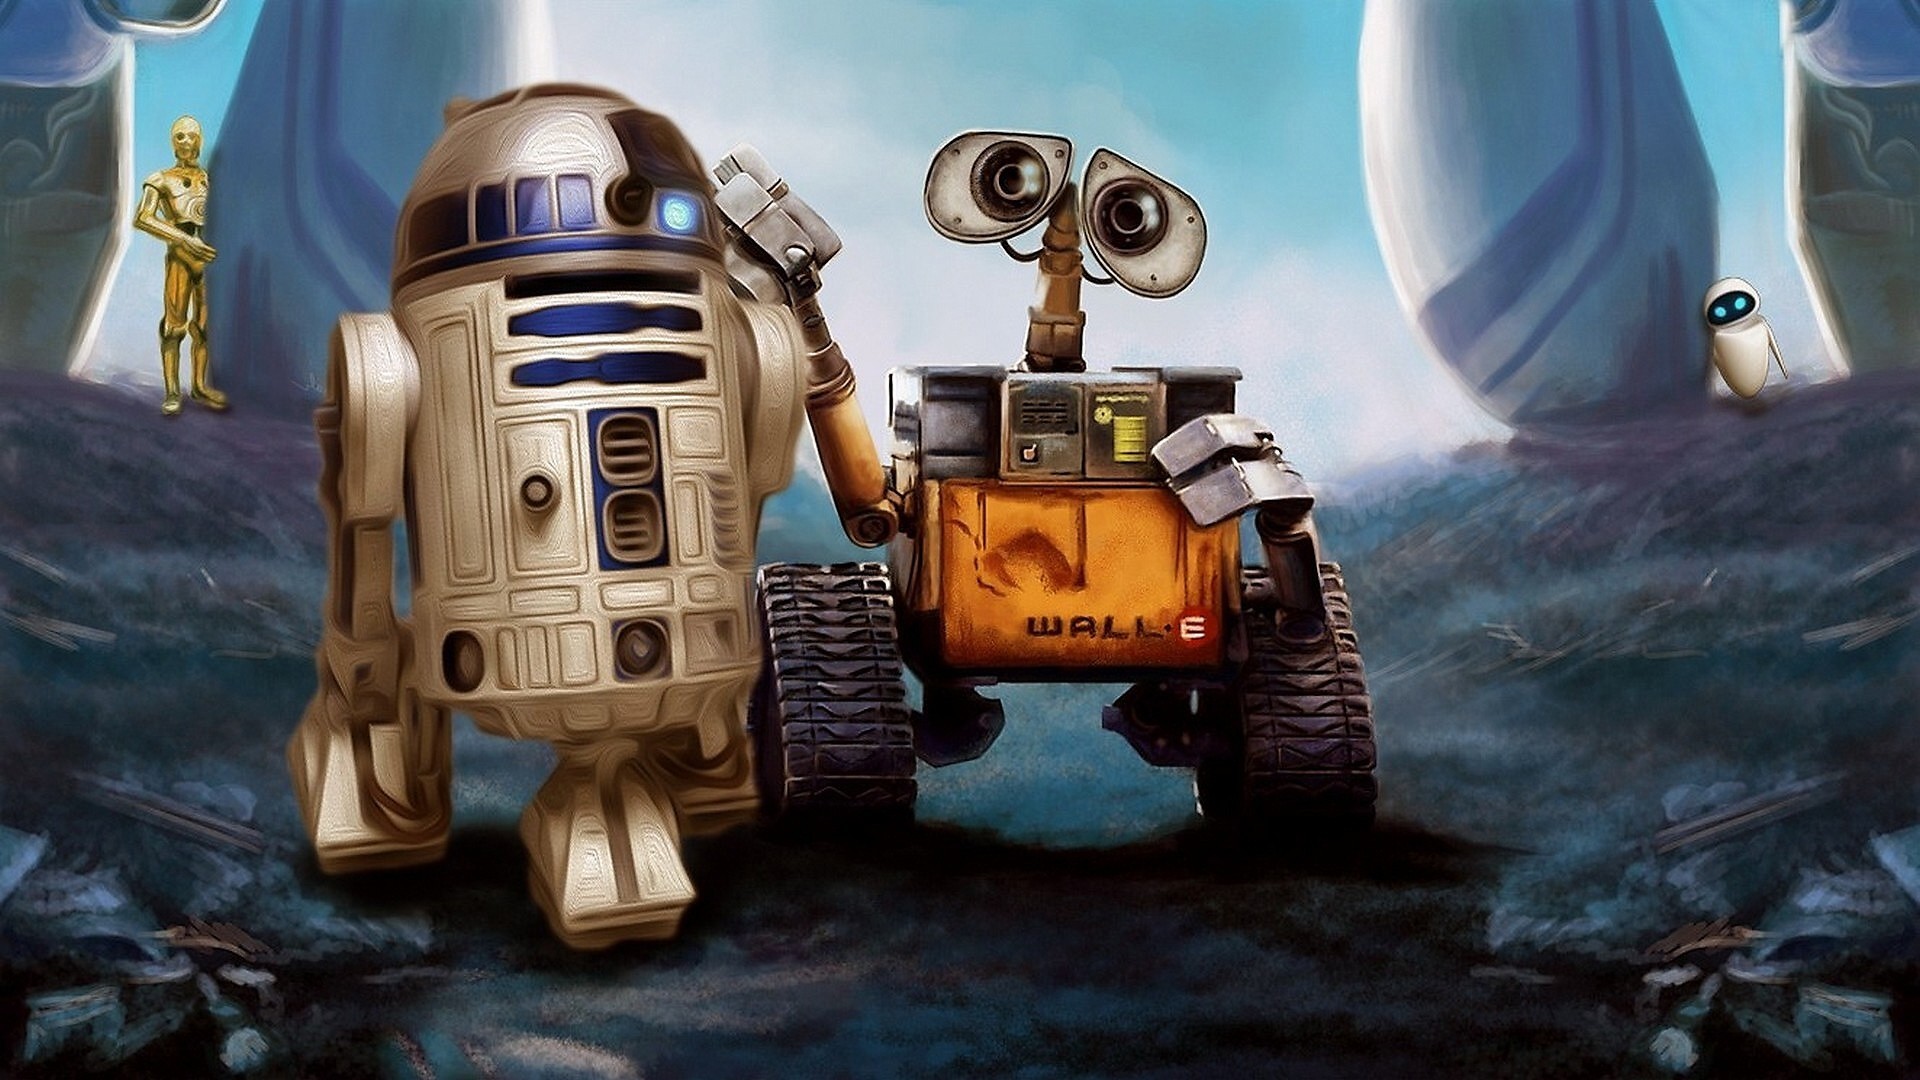 1920x1080 WALLÂ·E, Pixar Animation Studios, Star Wars, Robot, Movies, R2 D2, Crossover Wallpapers  HD / Desktop and Mobile Backgrounds